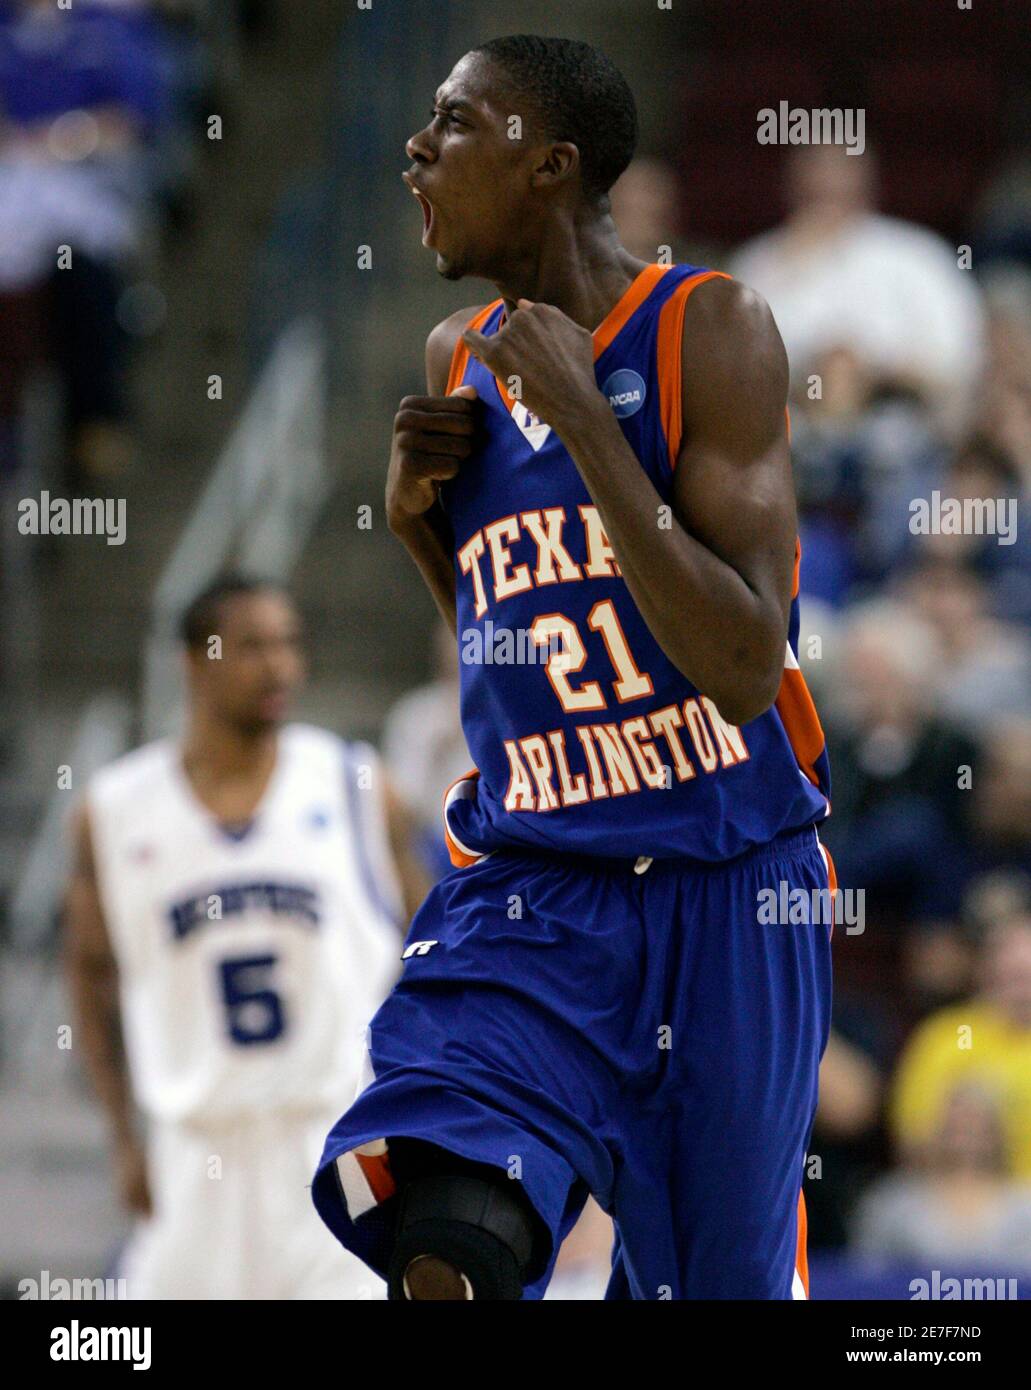 Texas-Arlington's Trey Parker celebrates after making a shot against  Memphis during the first half of their first round NCAA men's basketball  tournament game in Little Rock, Arkansas March 21, 2008. REUTERS/Jessica  Rinaldi (